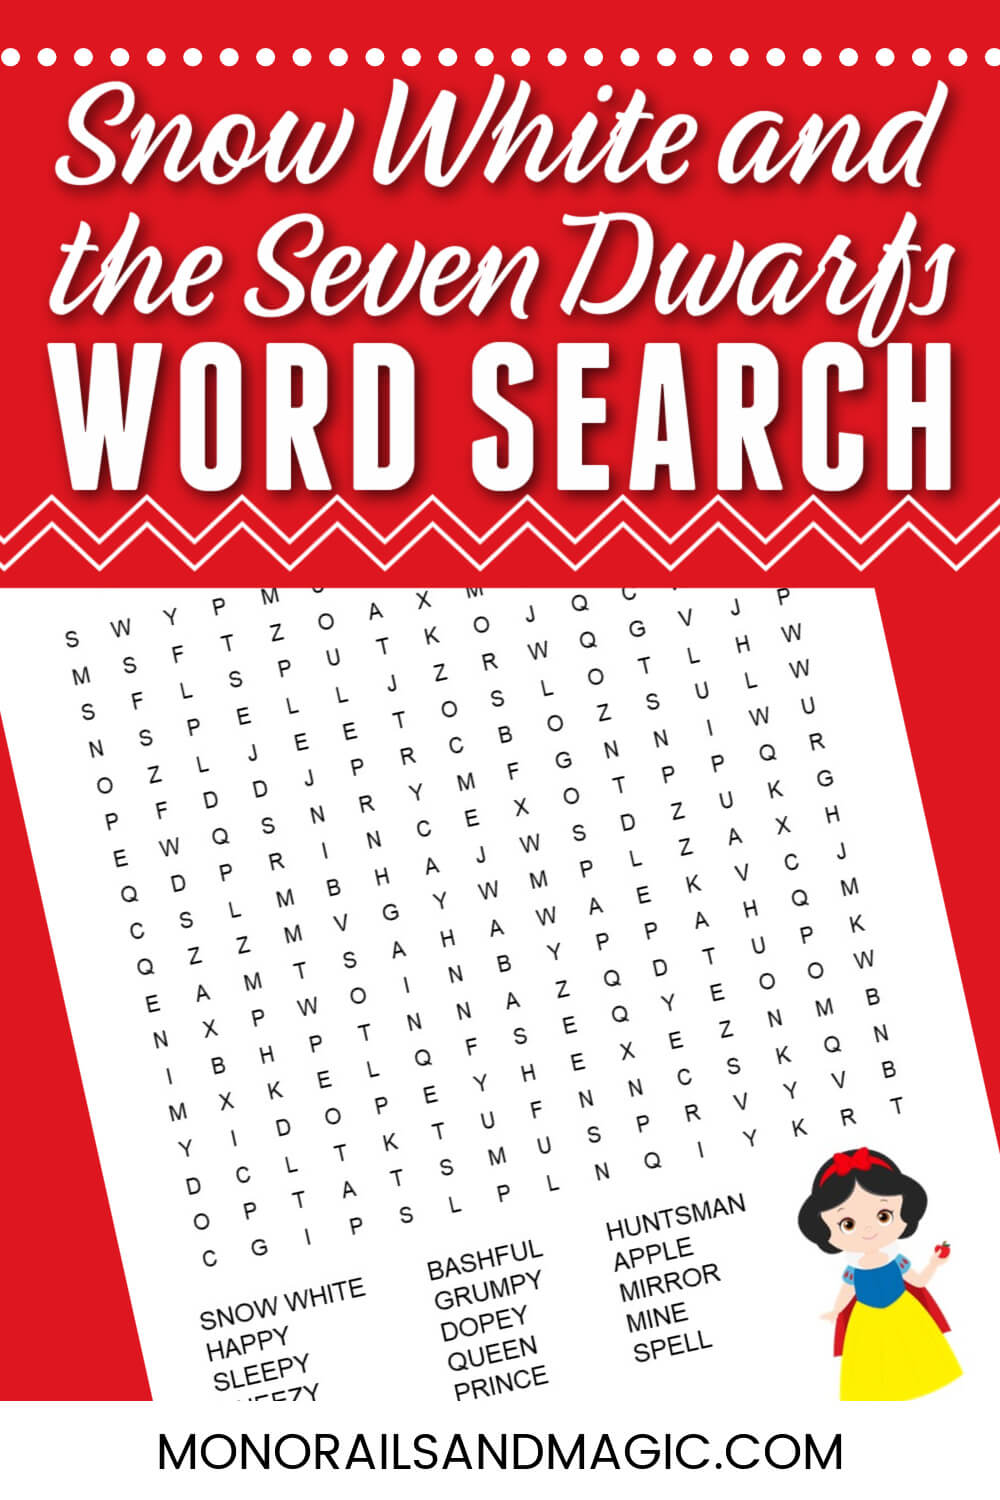 Free printable Snow White and the Seven Dwarfs word search for kids.